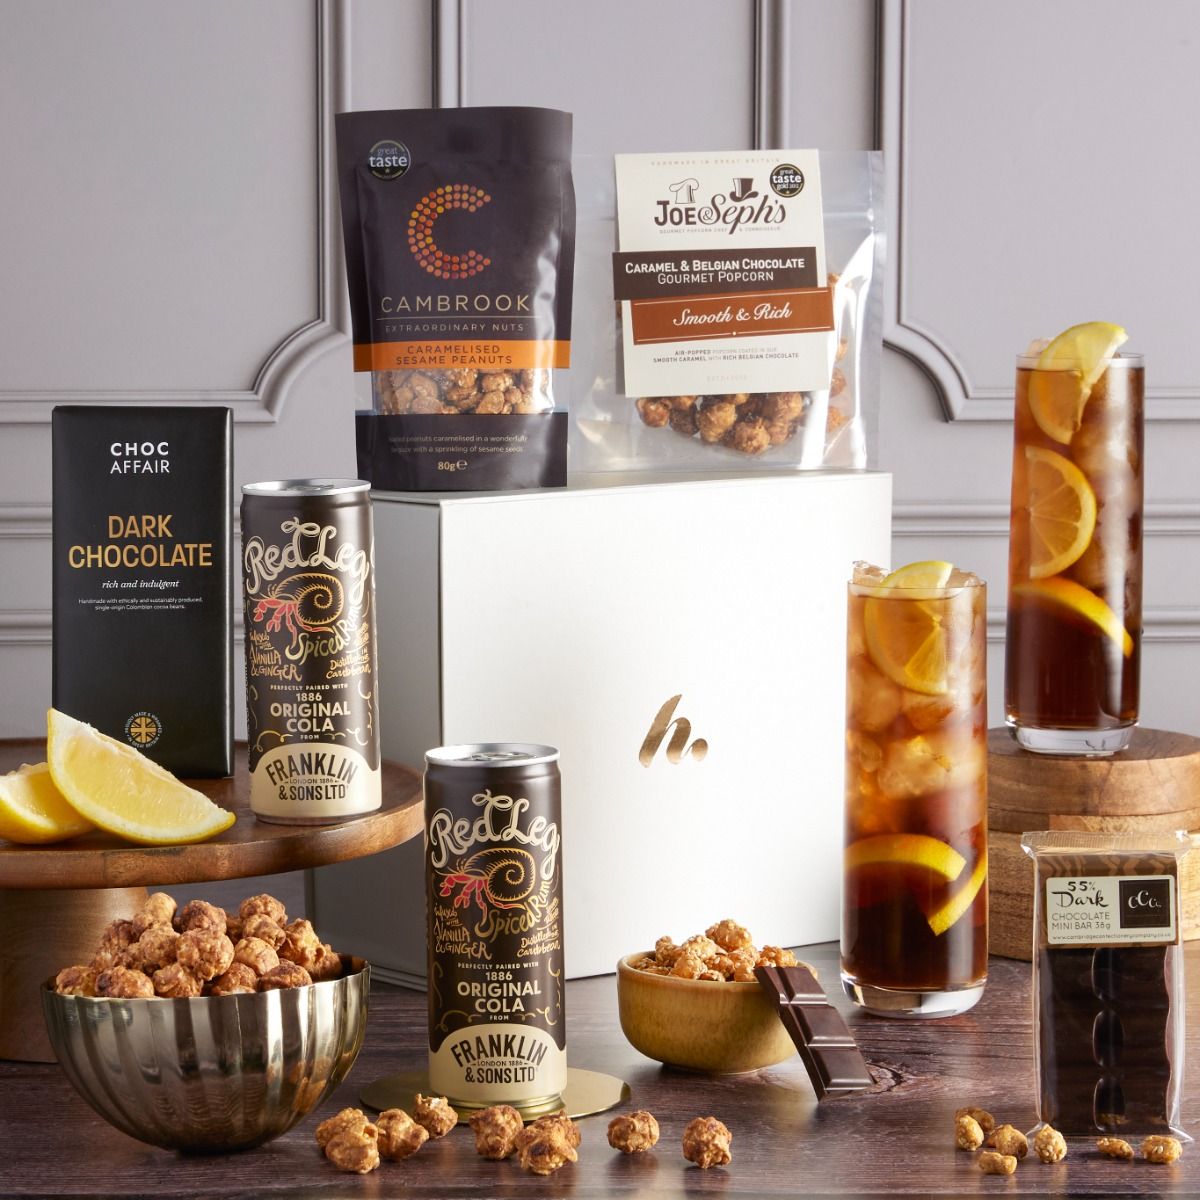 The Rum and Treats Hamper with contents on display